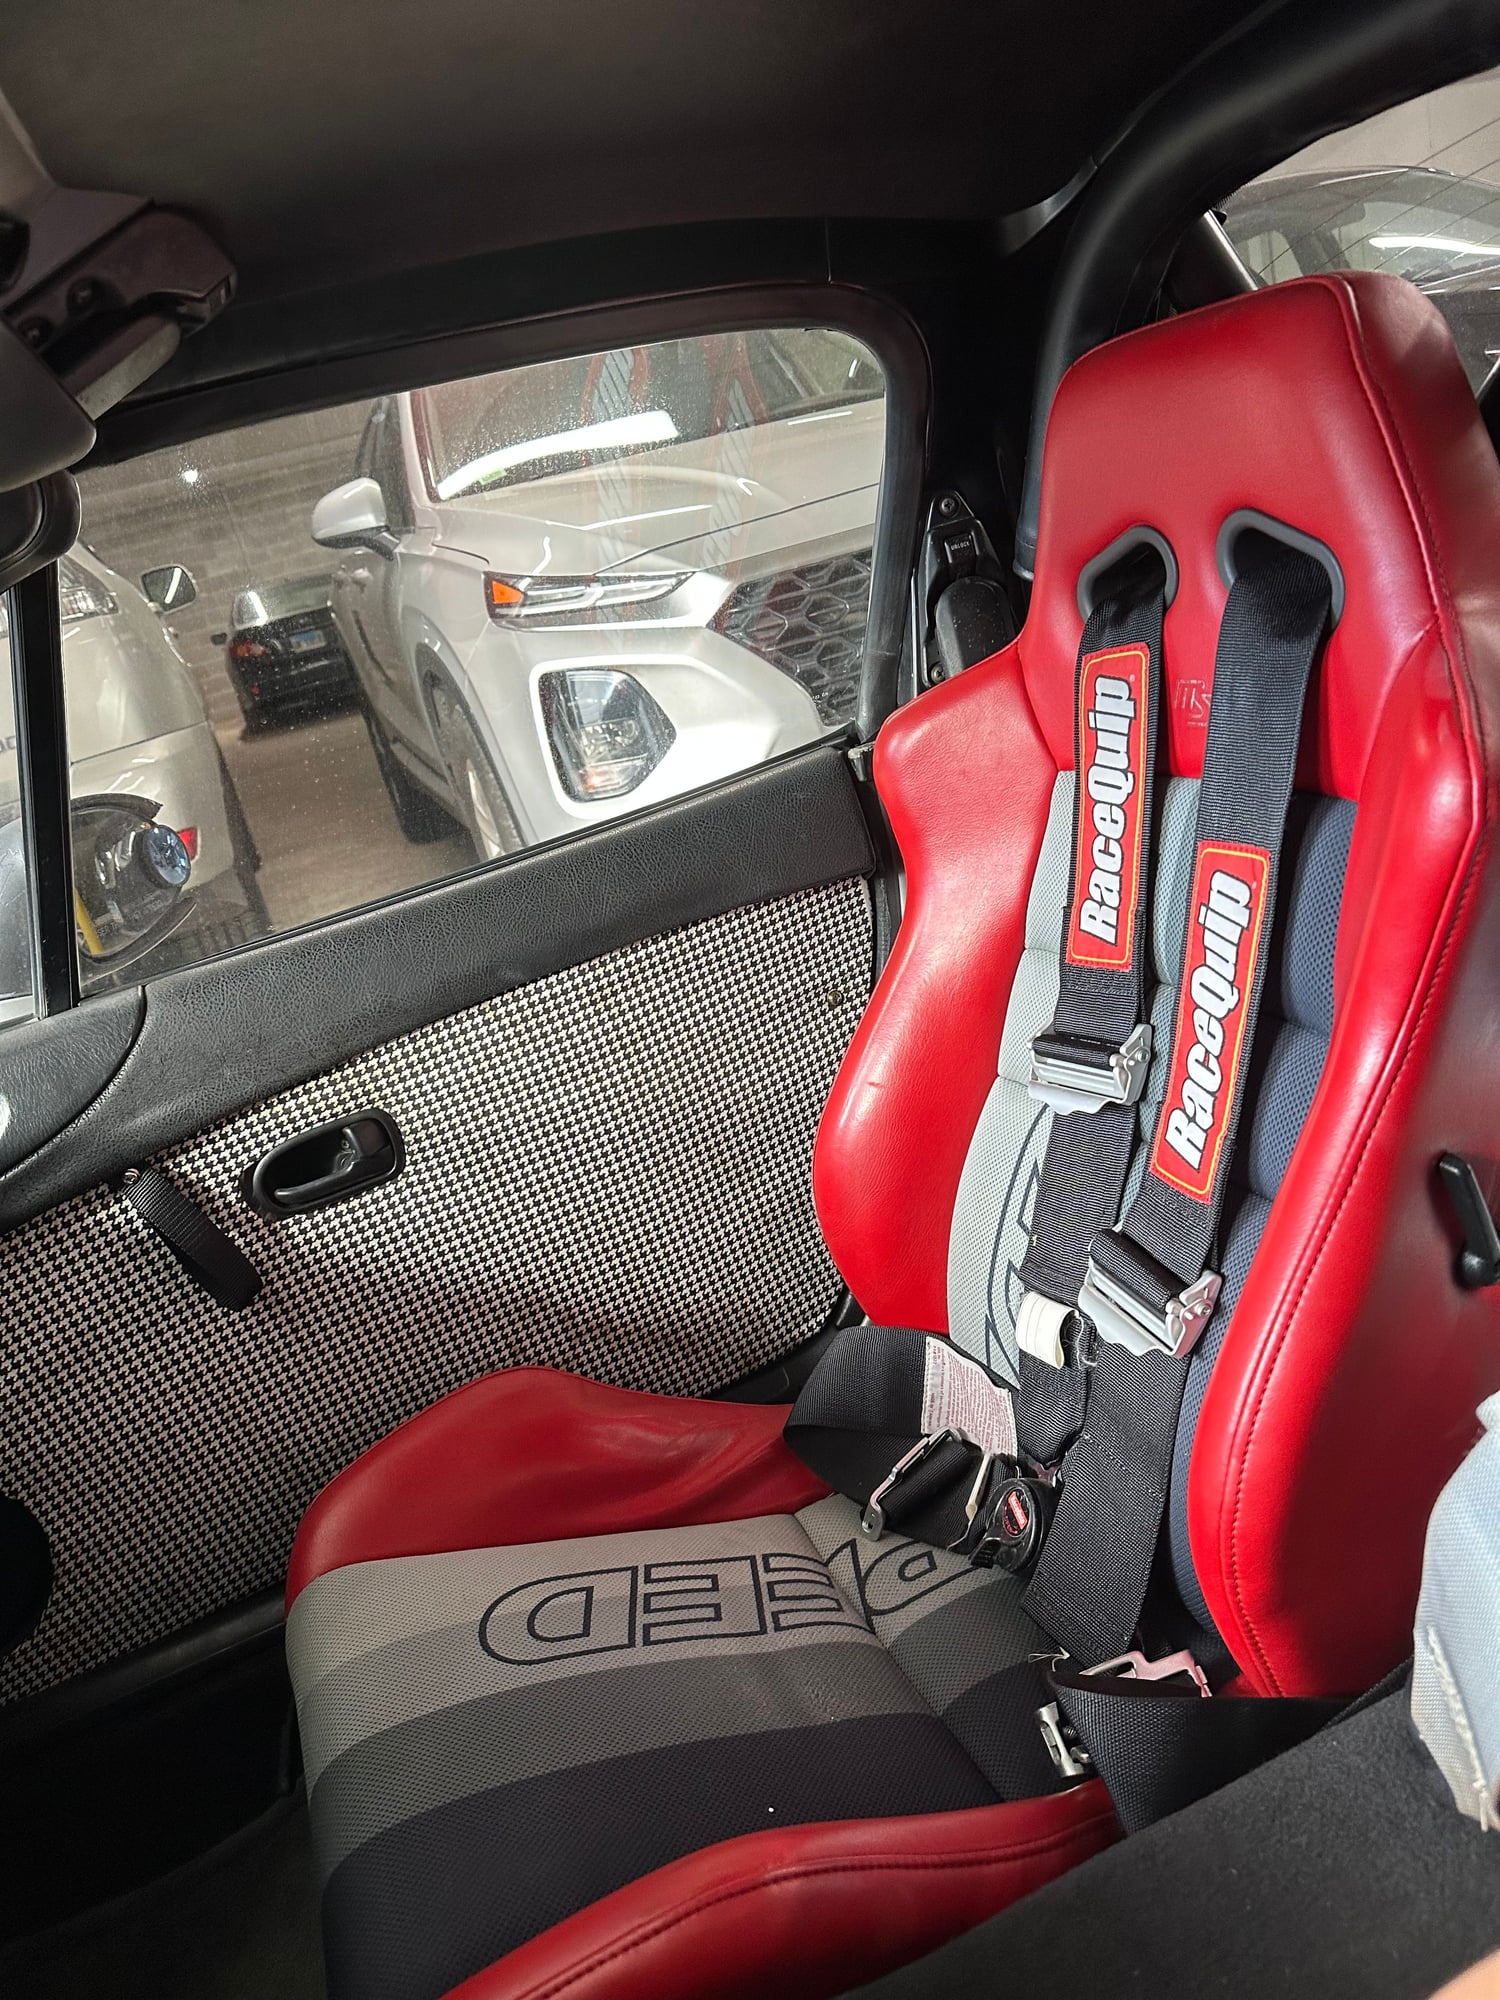 Interior/Upholstery - Red Mazdspeed seat - Used - All Years Any Make All Models - Chicago, IL 60647, United States